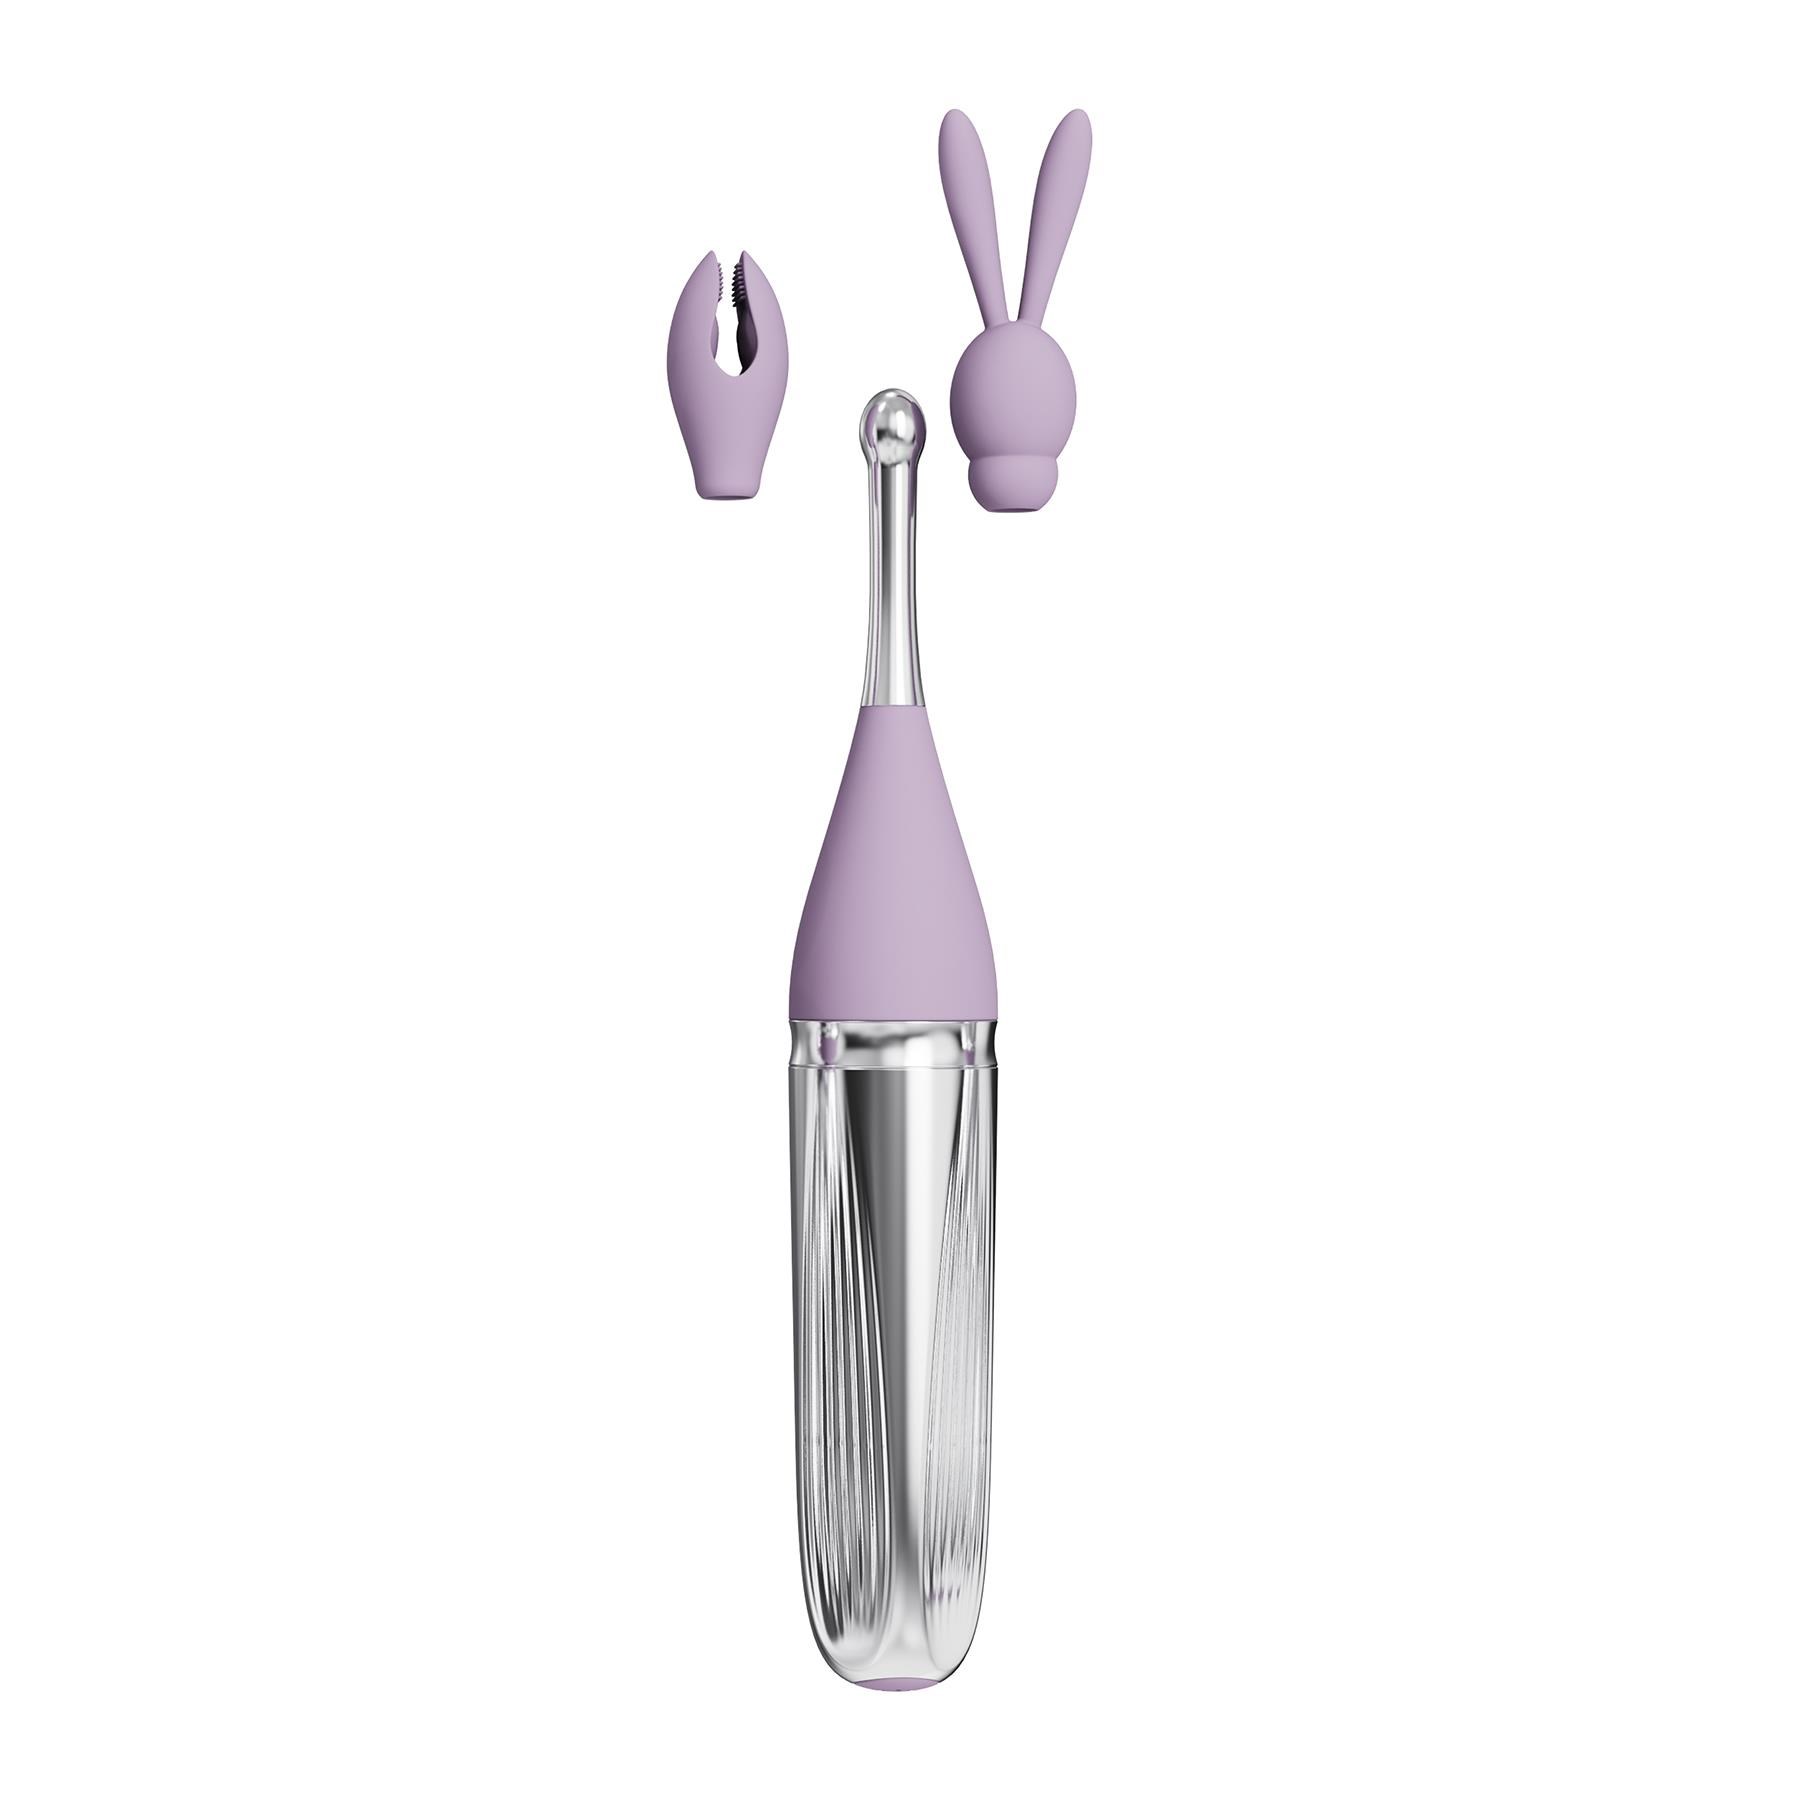 Adam & Eve Sweet Dreams Massager Kit - Rabbit Ear and Claw Attachments